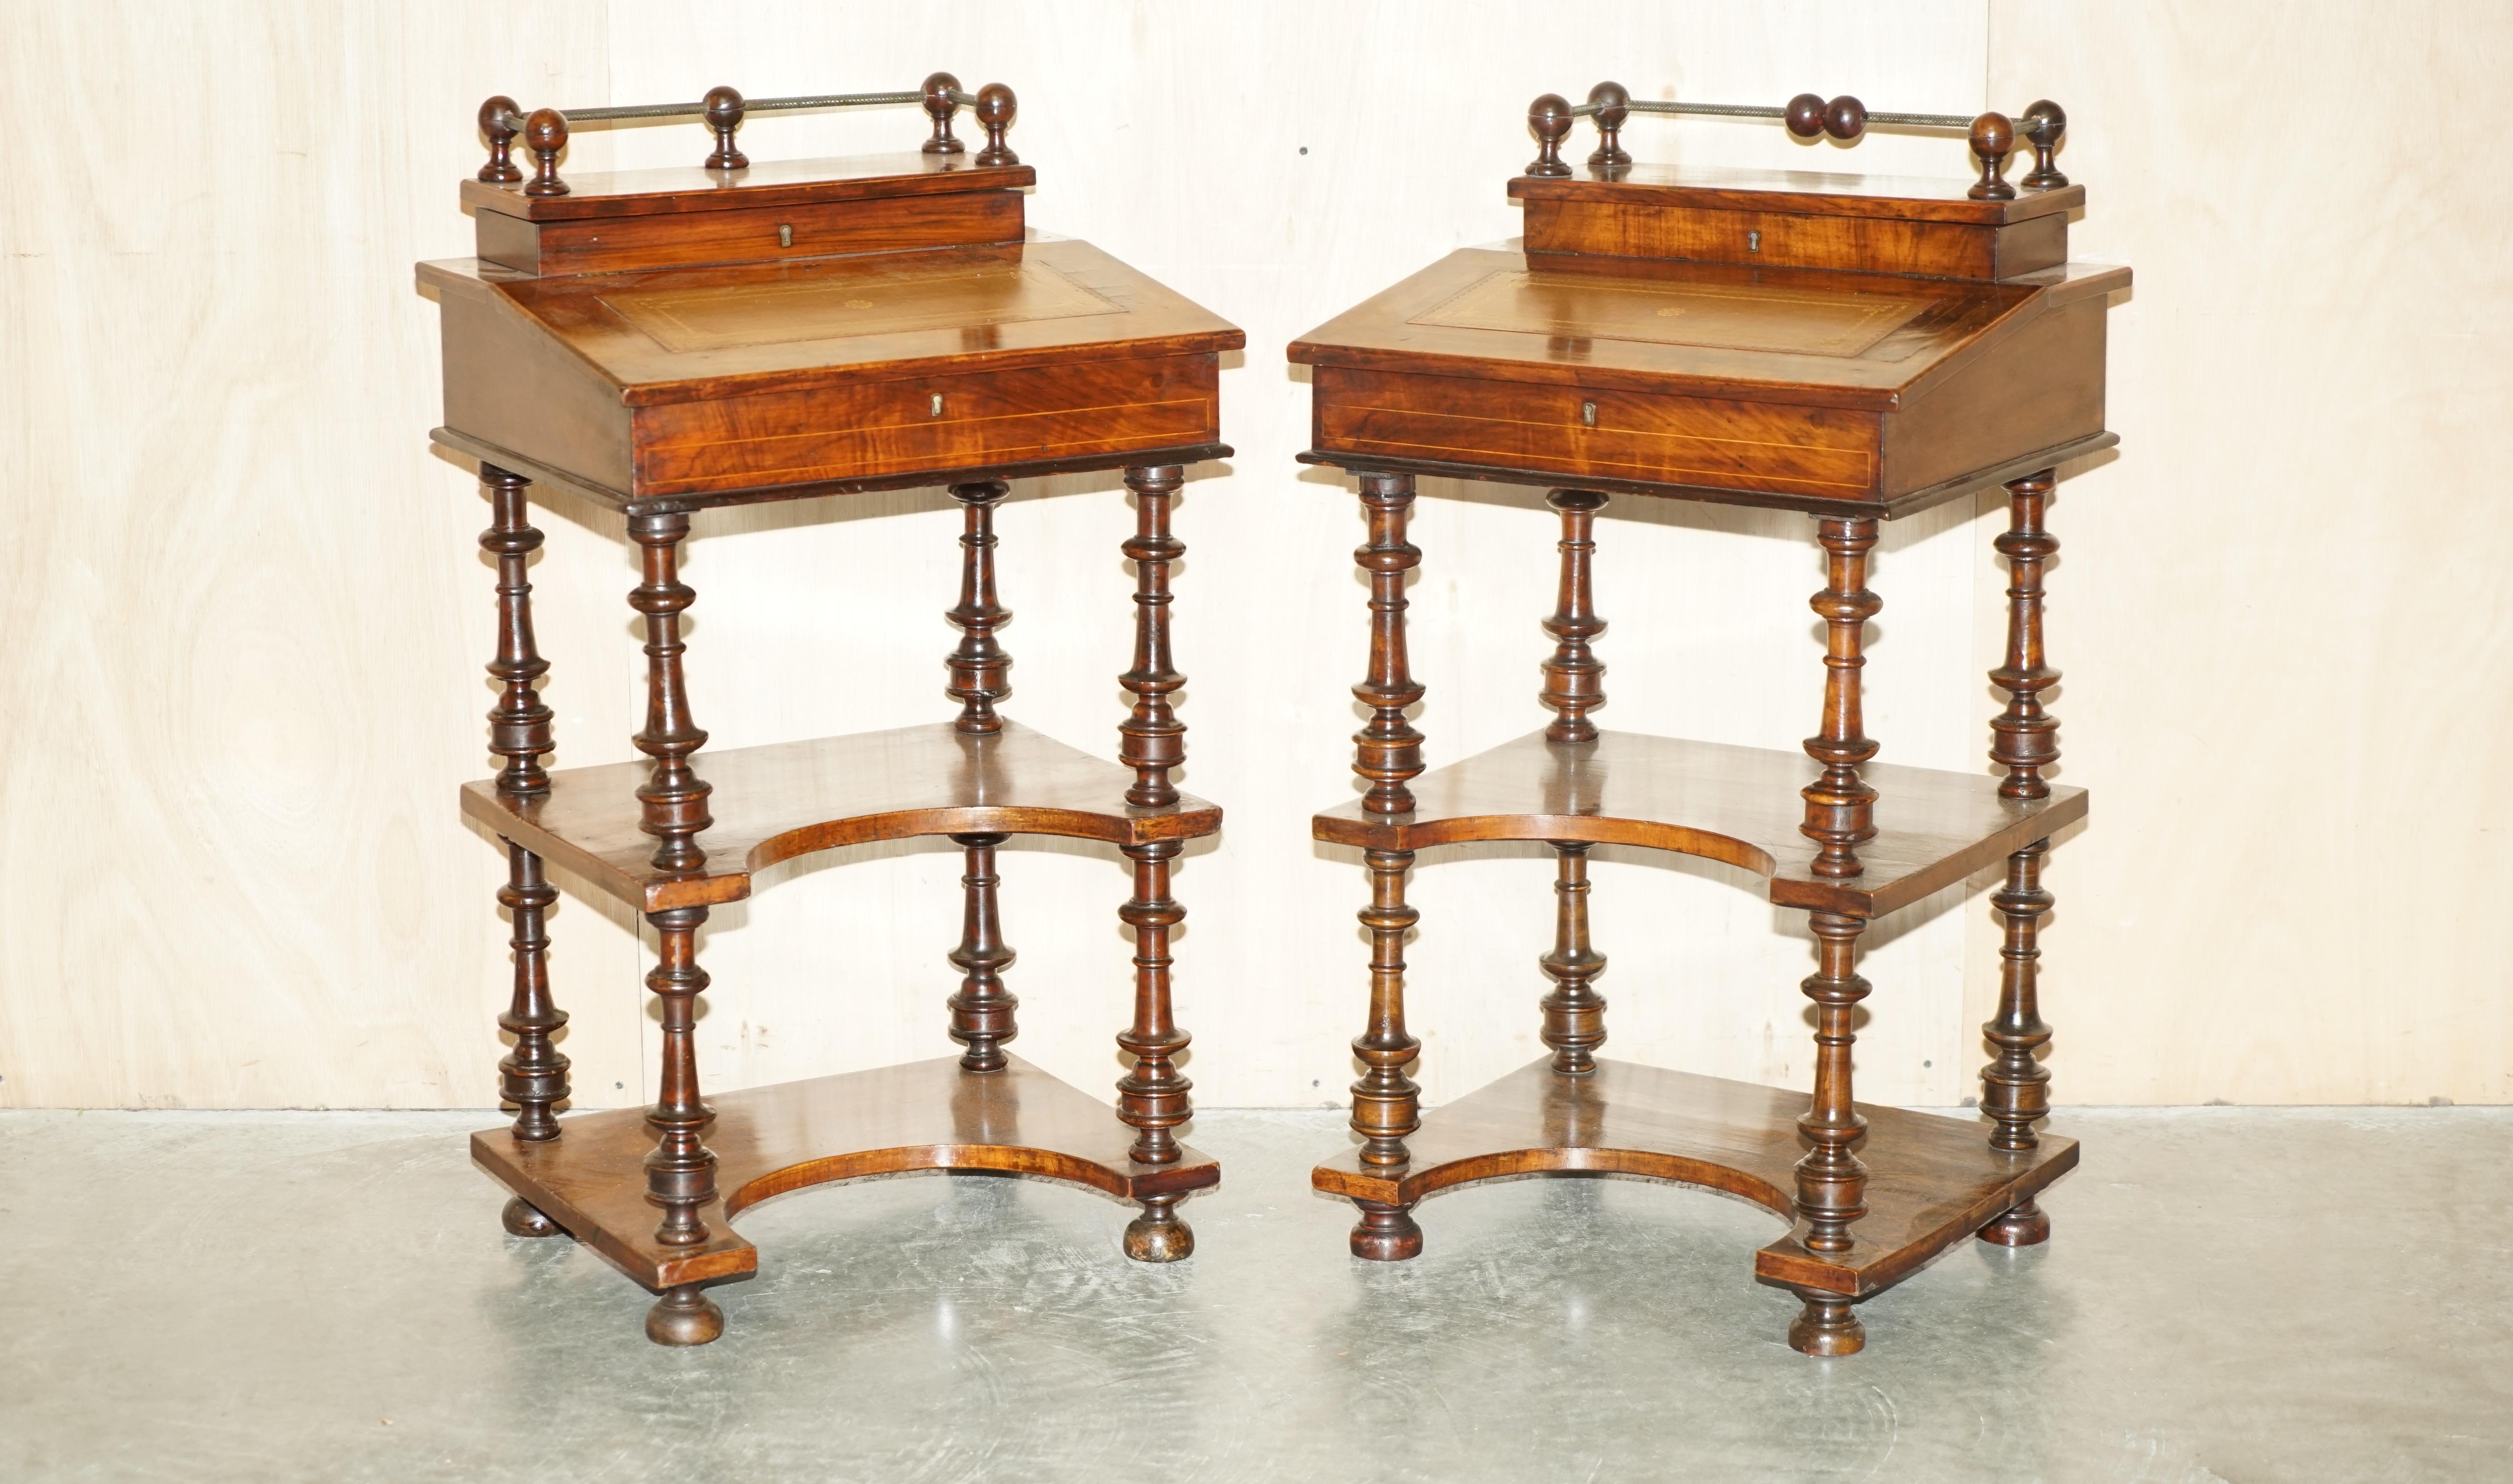 We are delighted to offer for sale this exceptional pair of fully restored, Regency circa 1810-1820, Walnut & Brown leather Daveport desk side table bookcases

These are the only pair of Daveports I have ever seen this size, designed as open